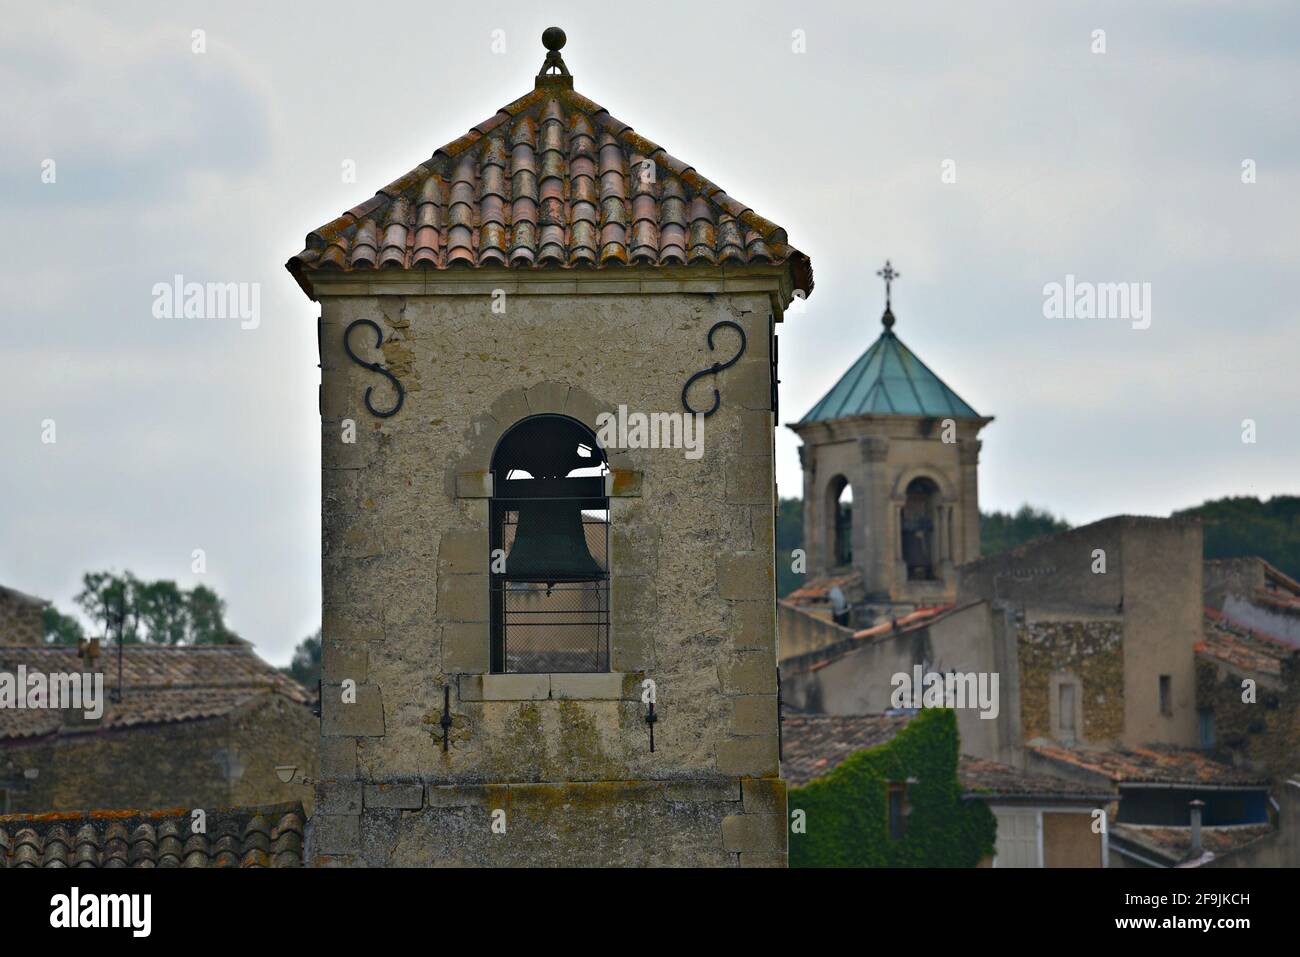 Belfry view of the Protestant Temple, a landmark in the countryside of Lourmarin, Vaucluse Provence, France. Stock Photo